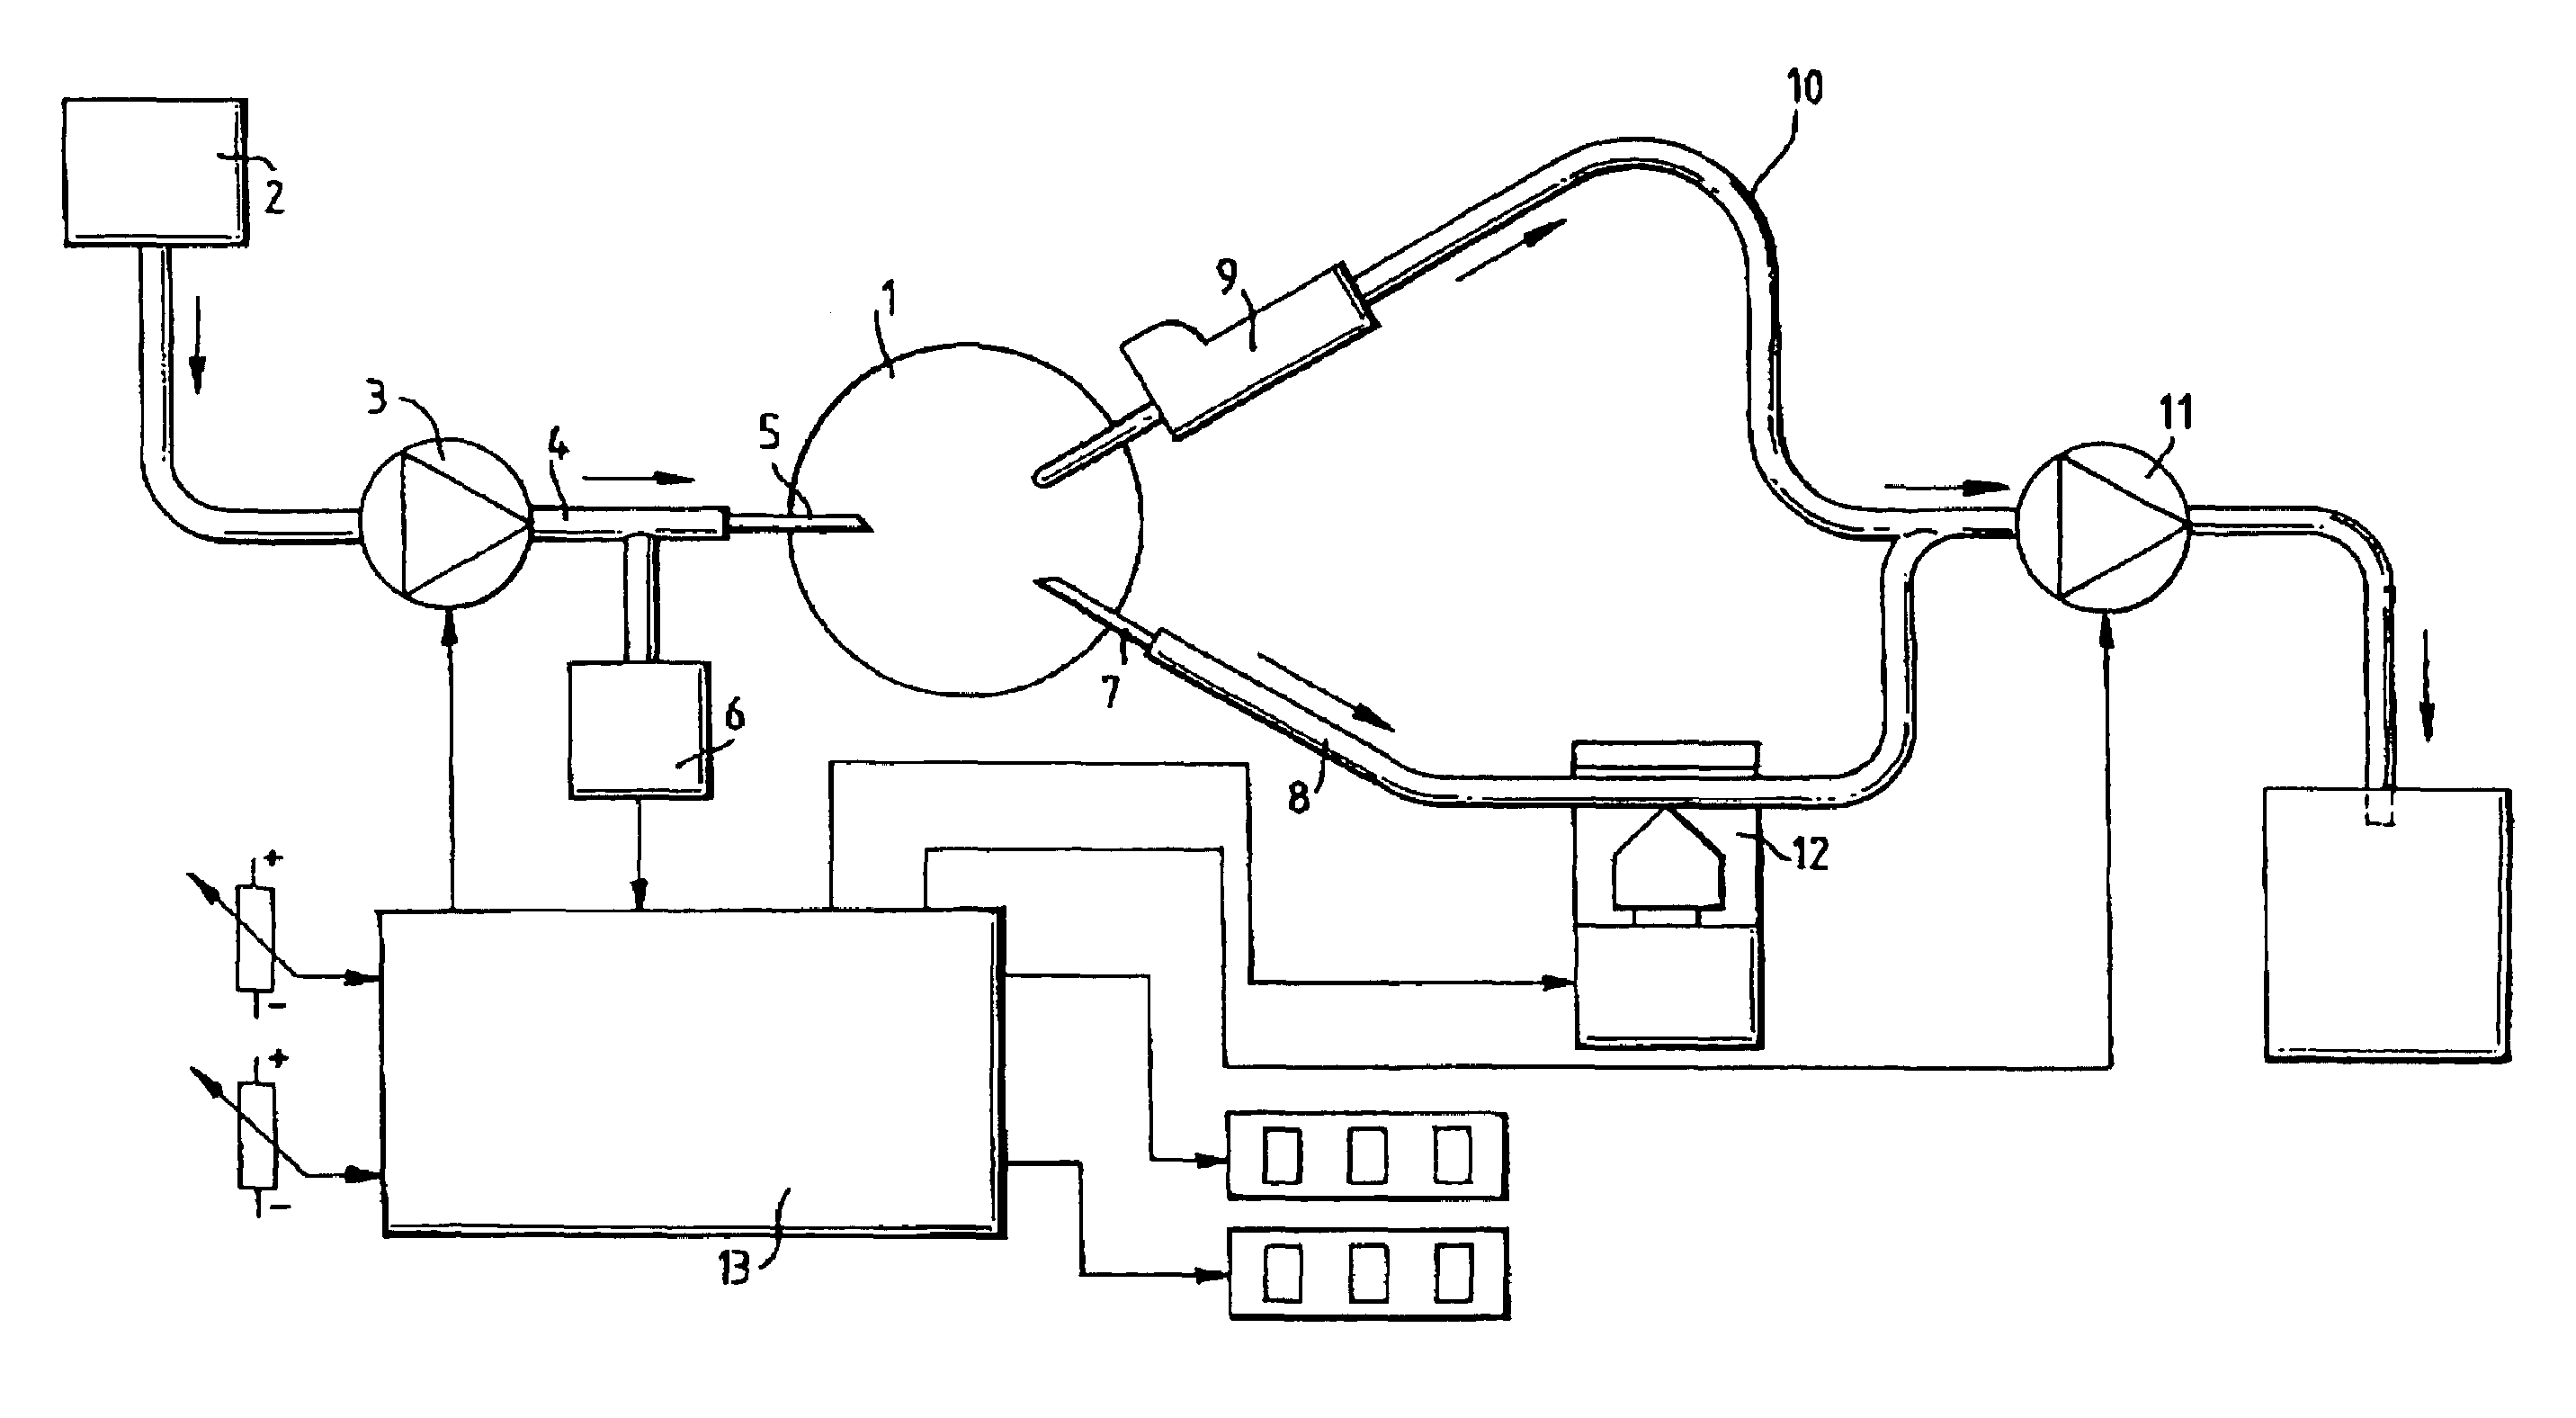 Device for rinsing a body cavity